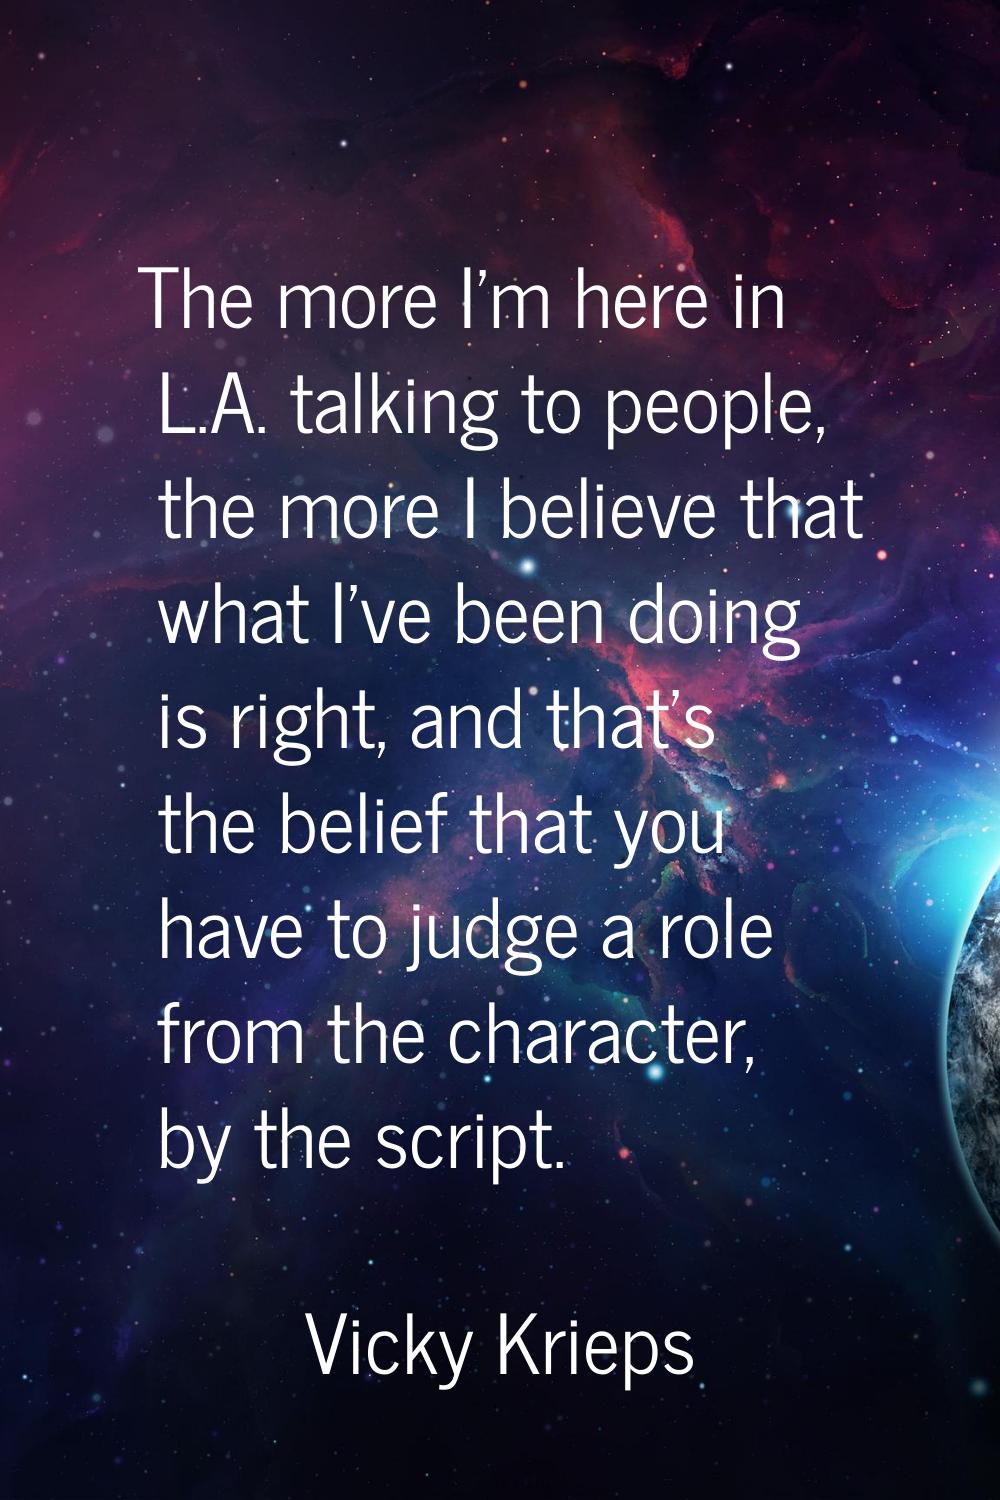 The more I'm here in L.A. talking to people, the more I believe that what I've been doing is right,